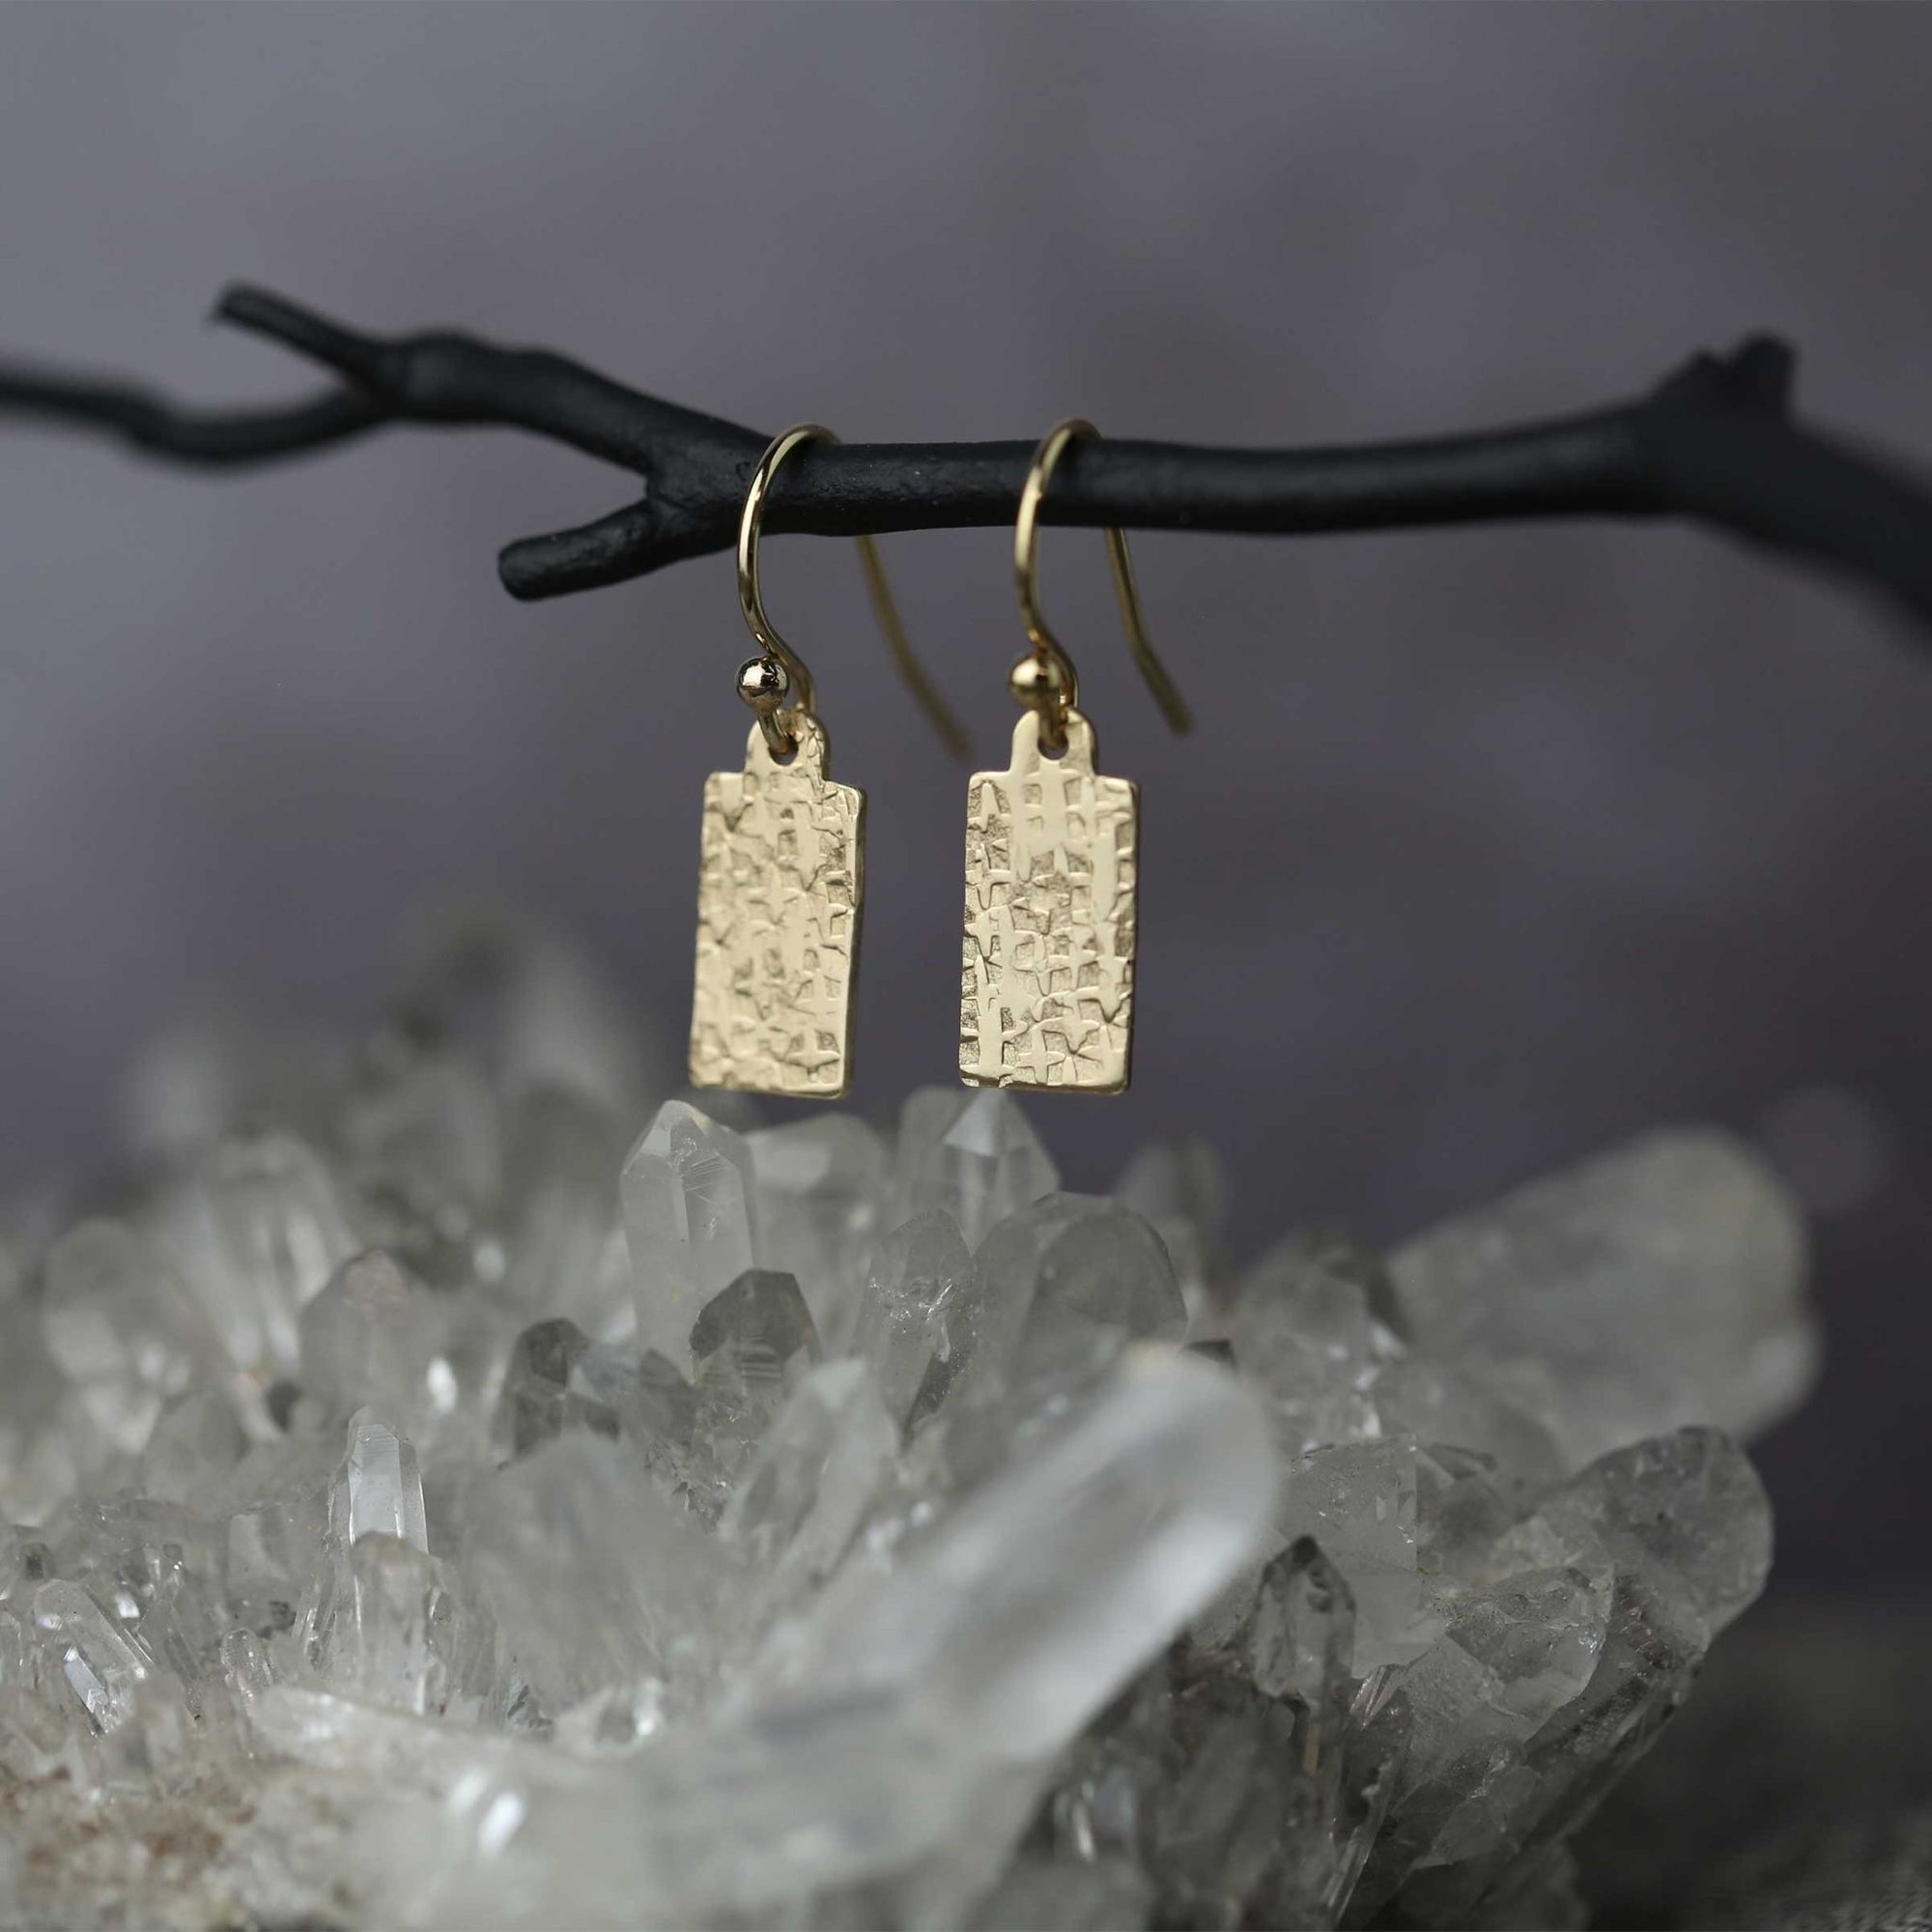 Textured Tag Earrings